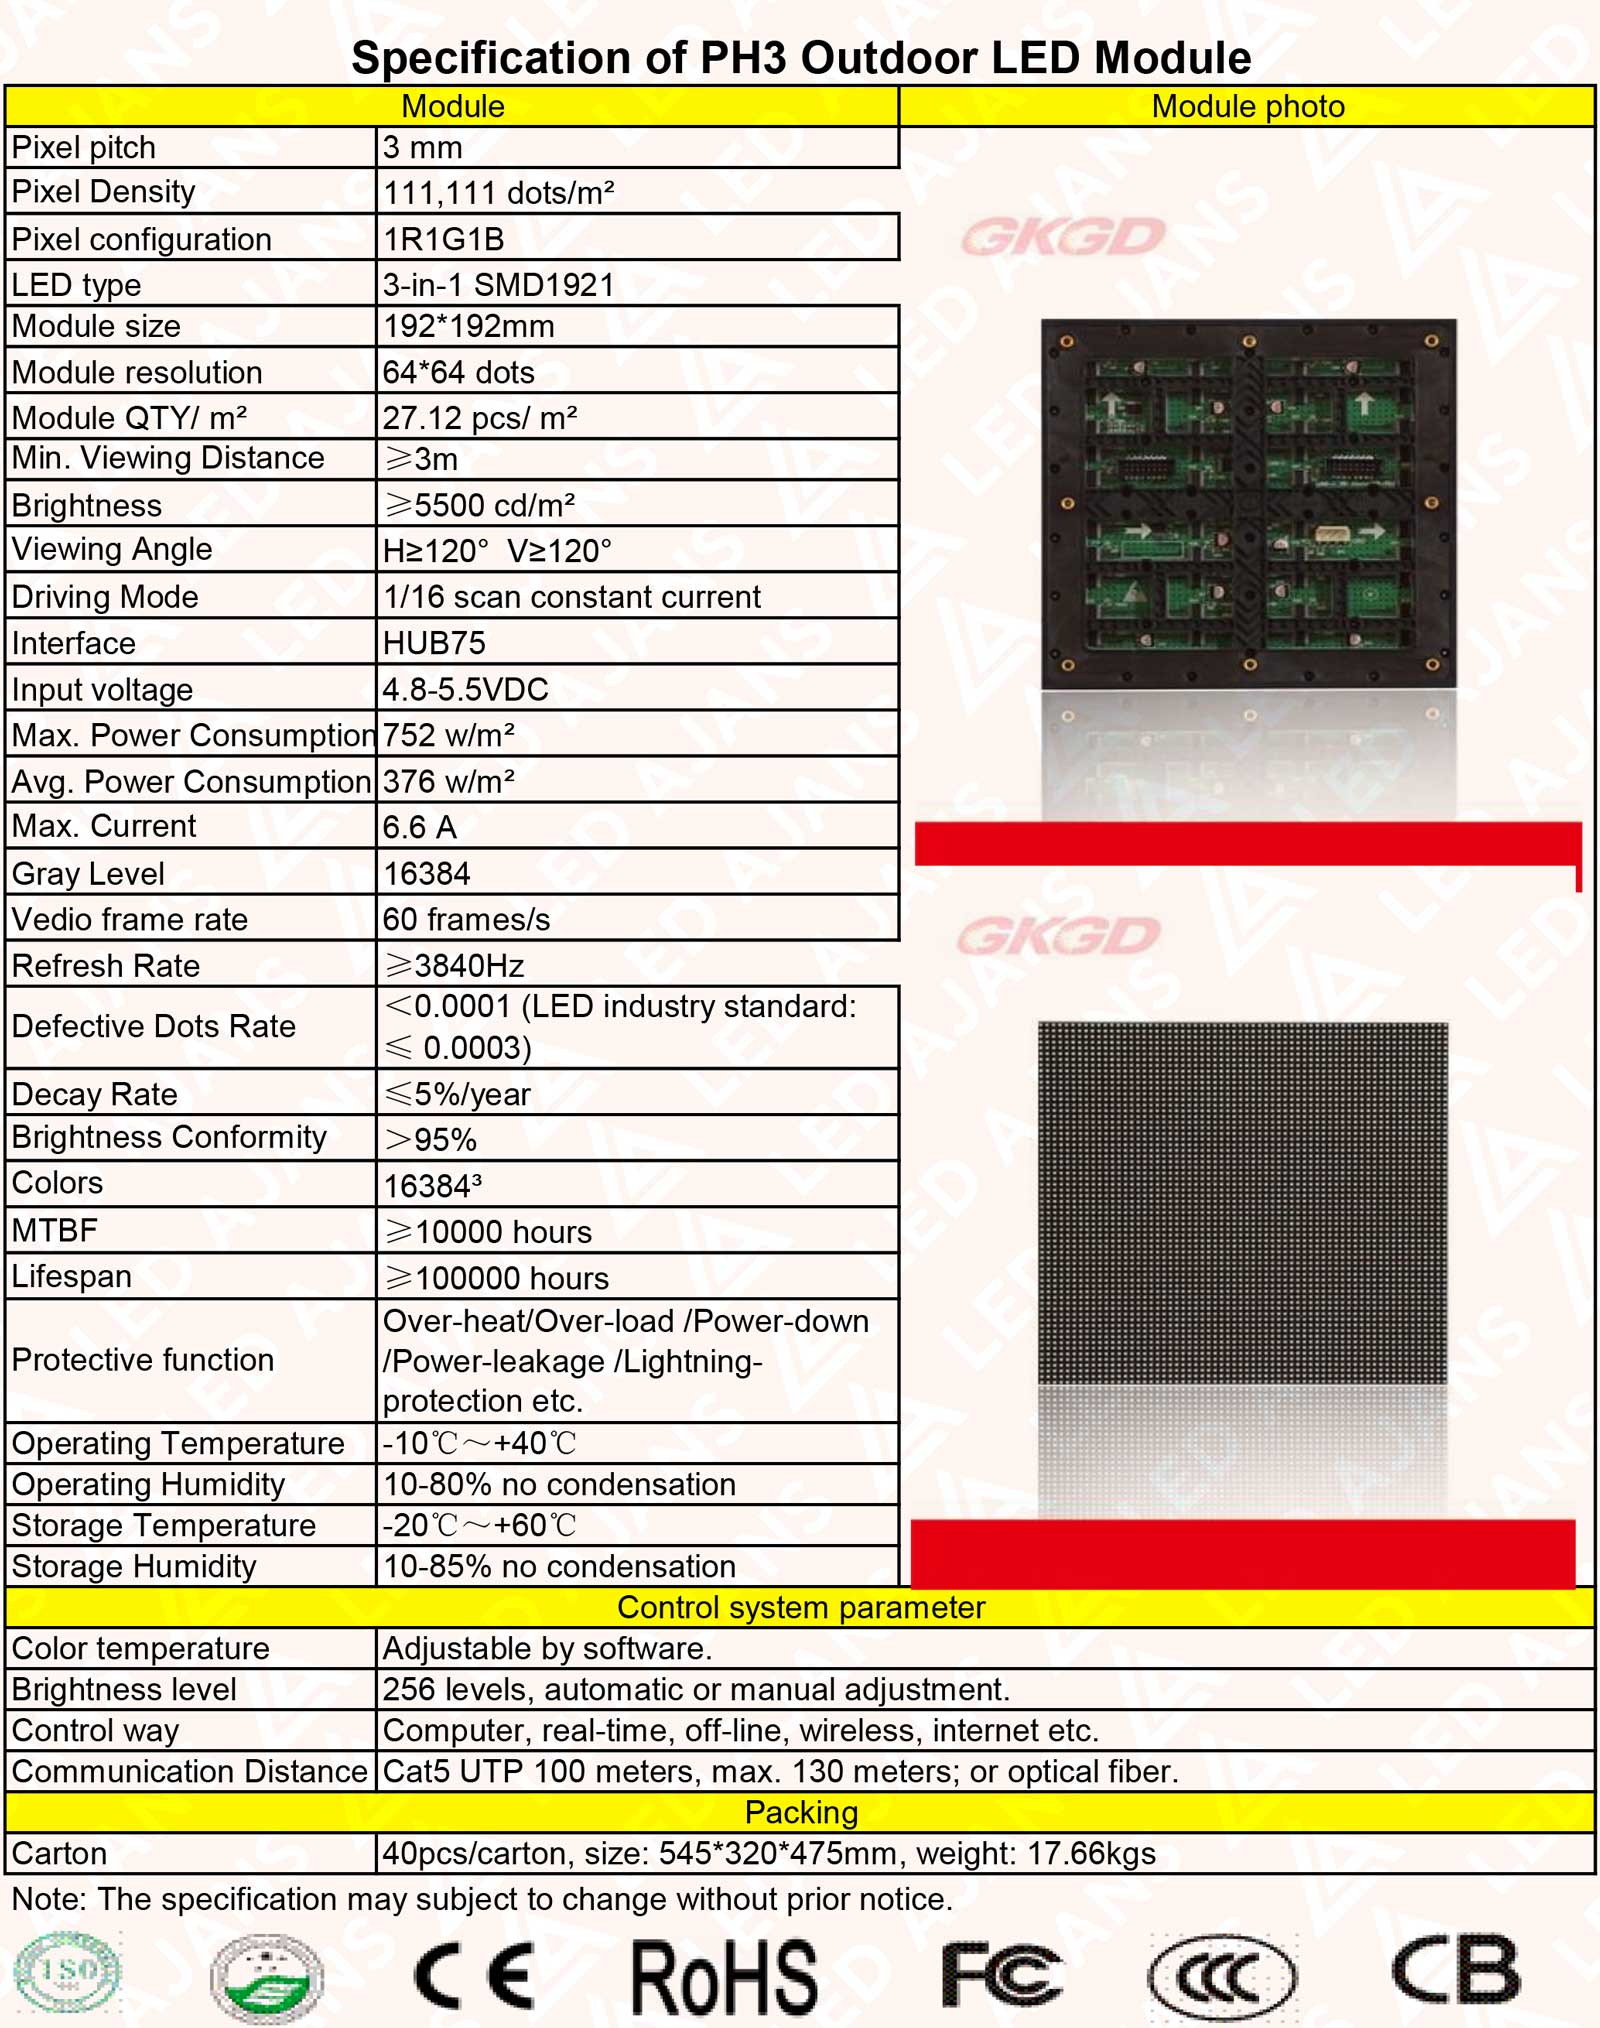 P3 Outdoor module specification GKGD 1